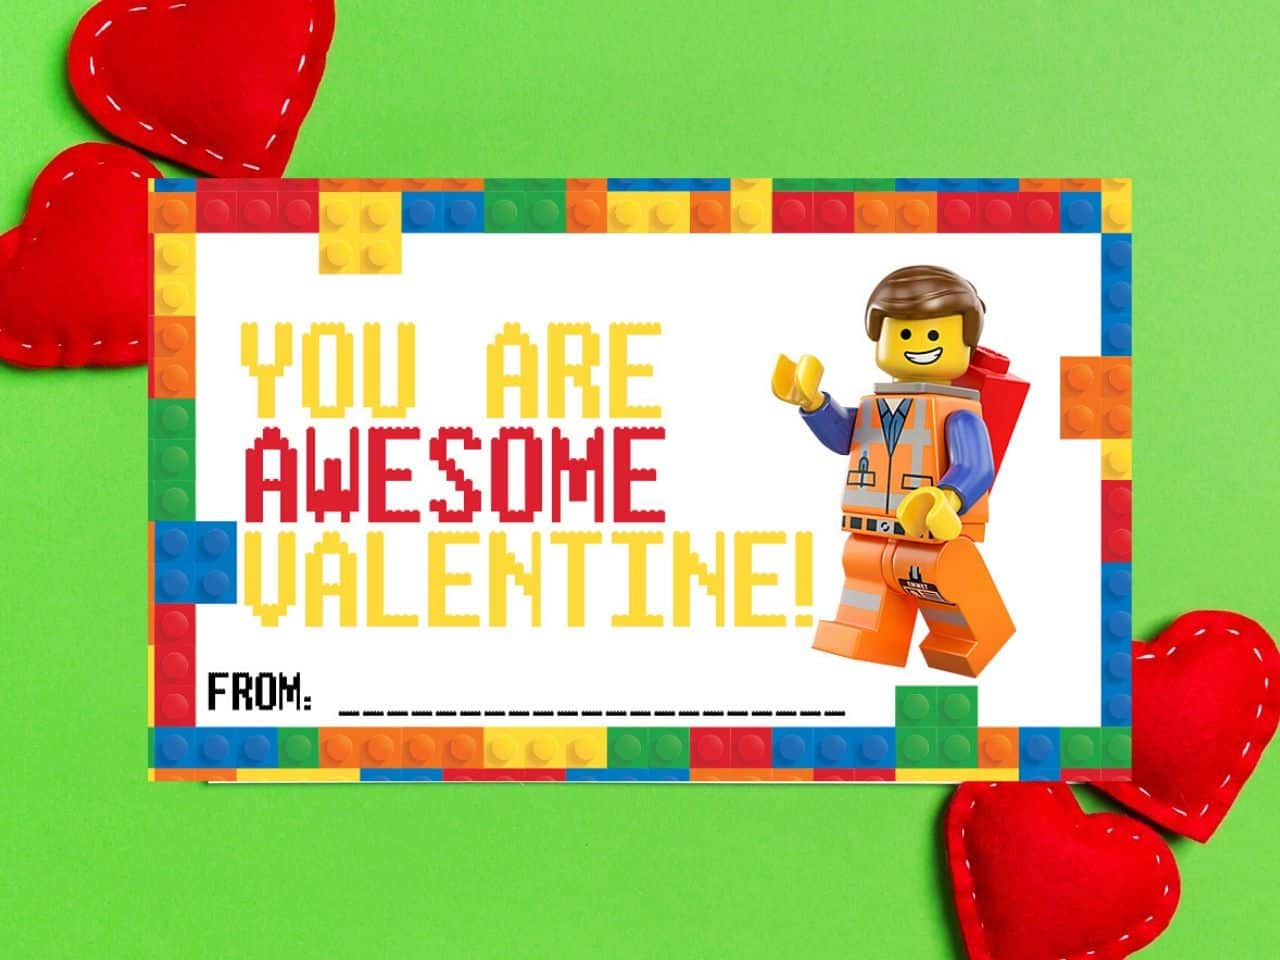 lego-valentines-free-printable-valentines-it-is-a-keeper